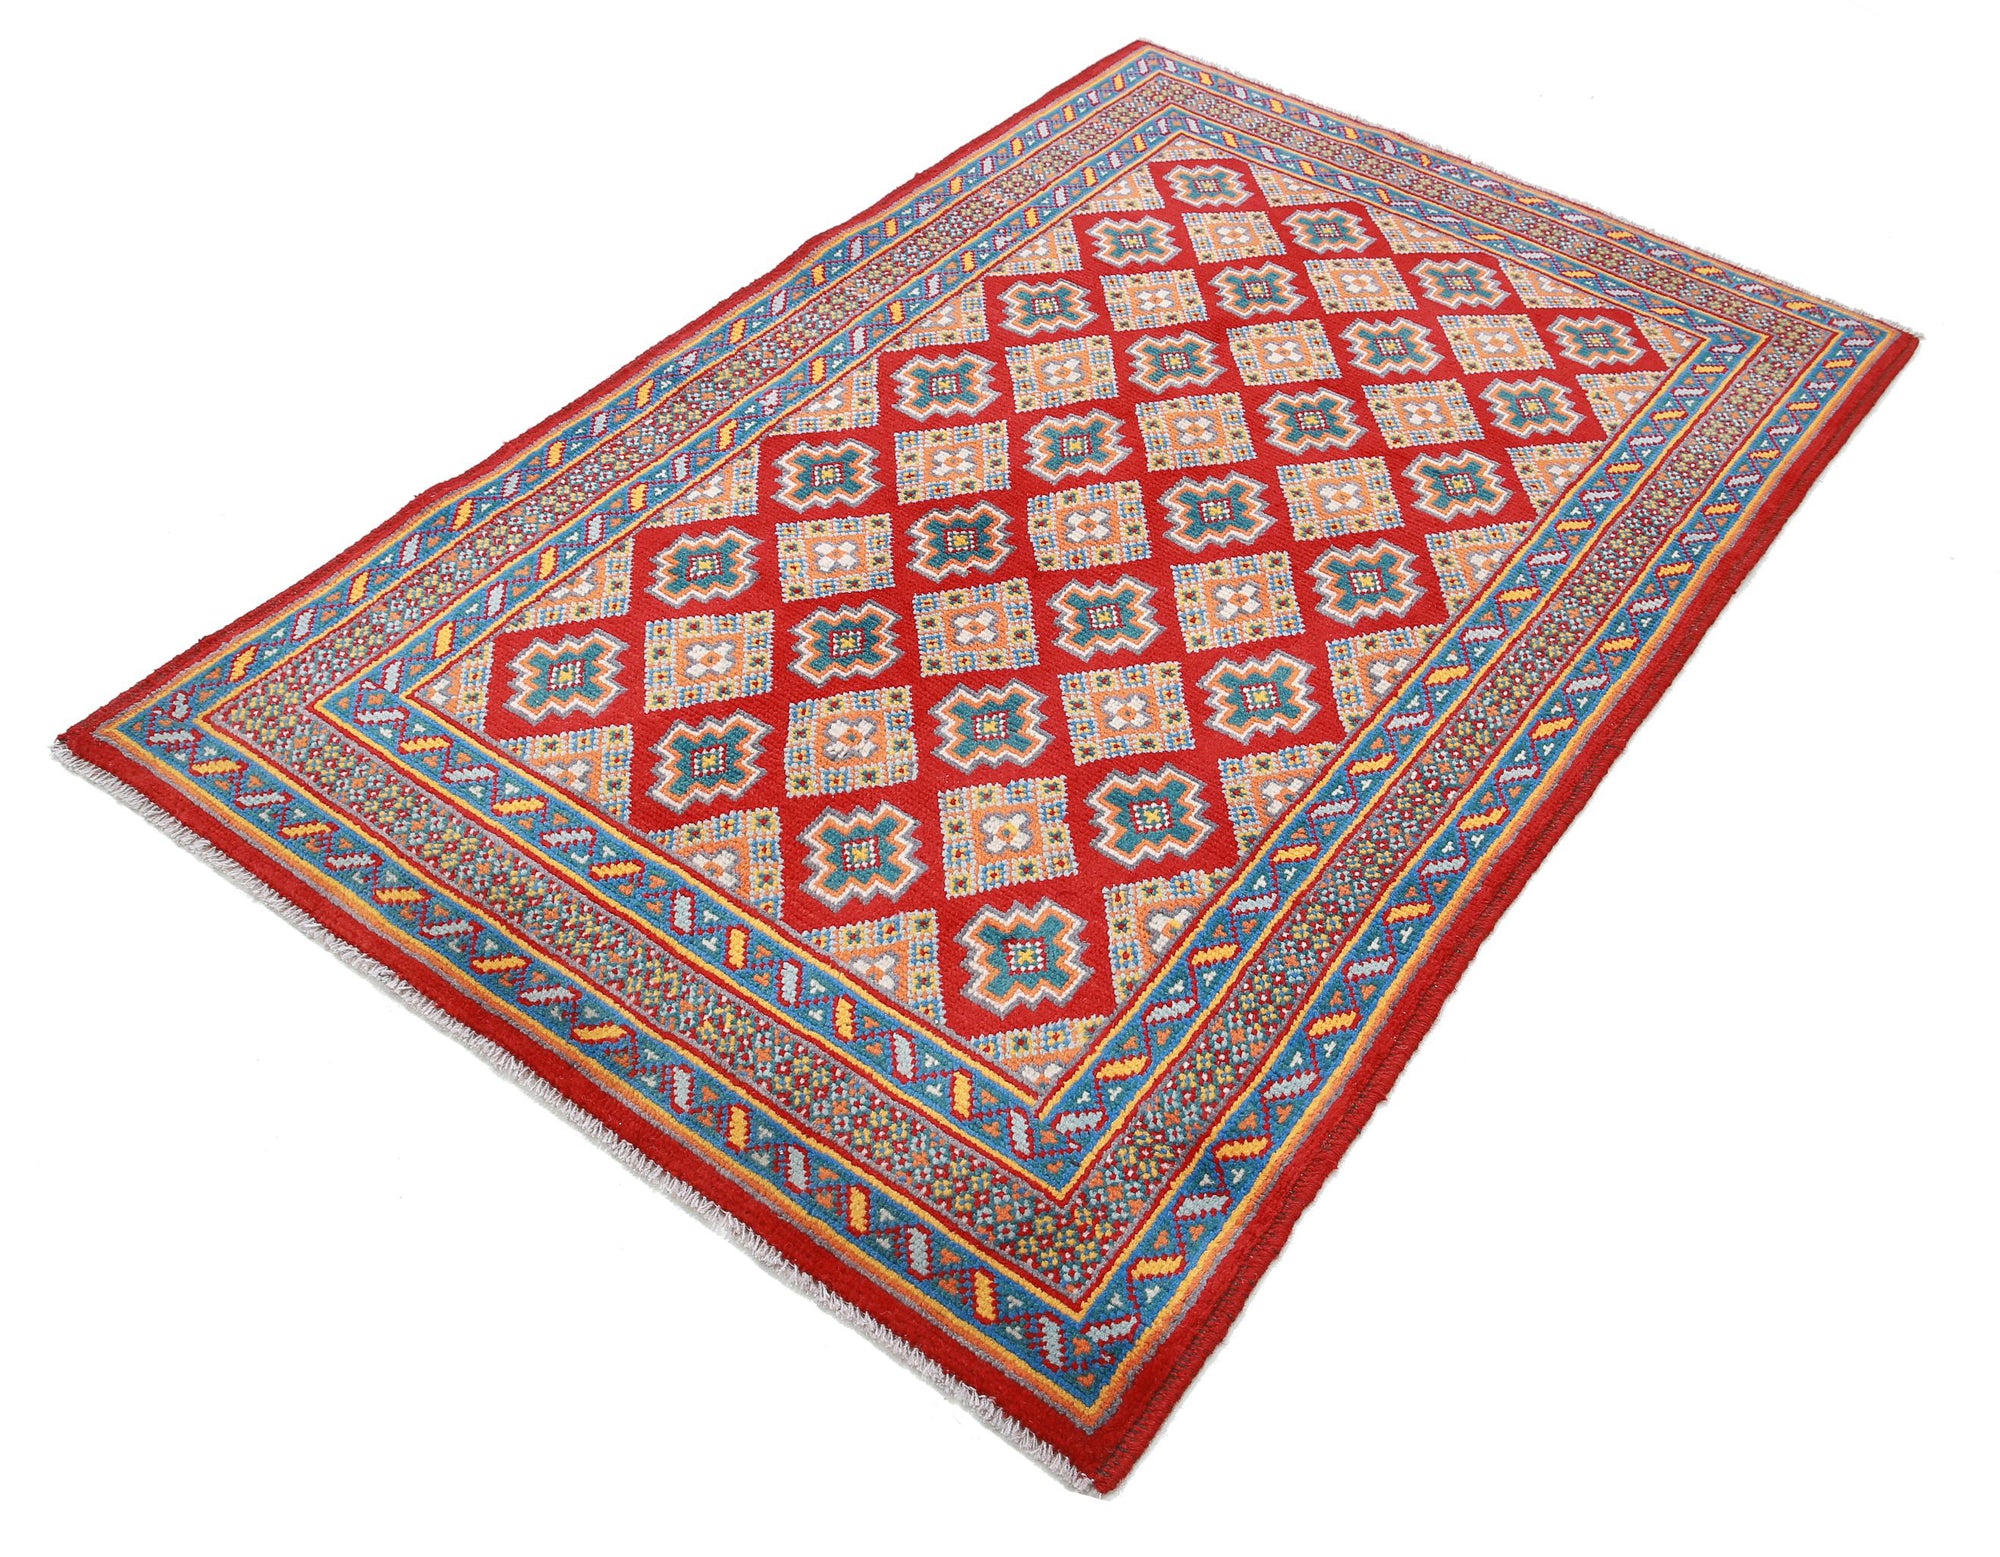 Revival-hand-knotted-qarghani-wool-rug-5014214-2.jpg